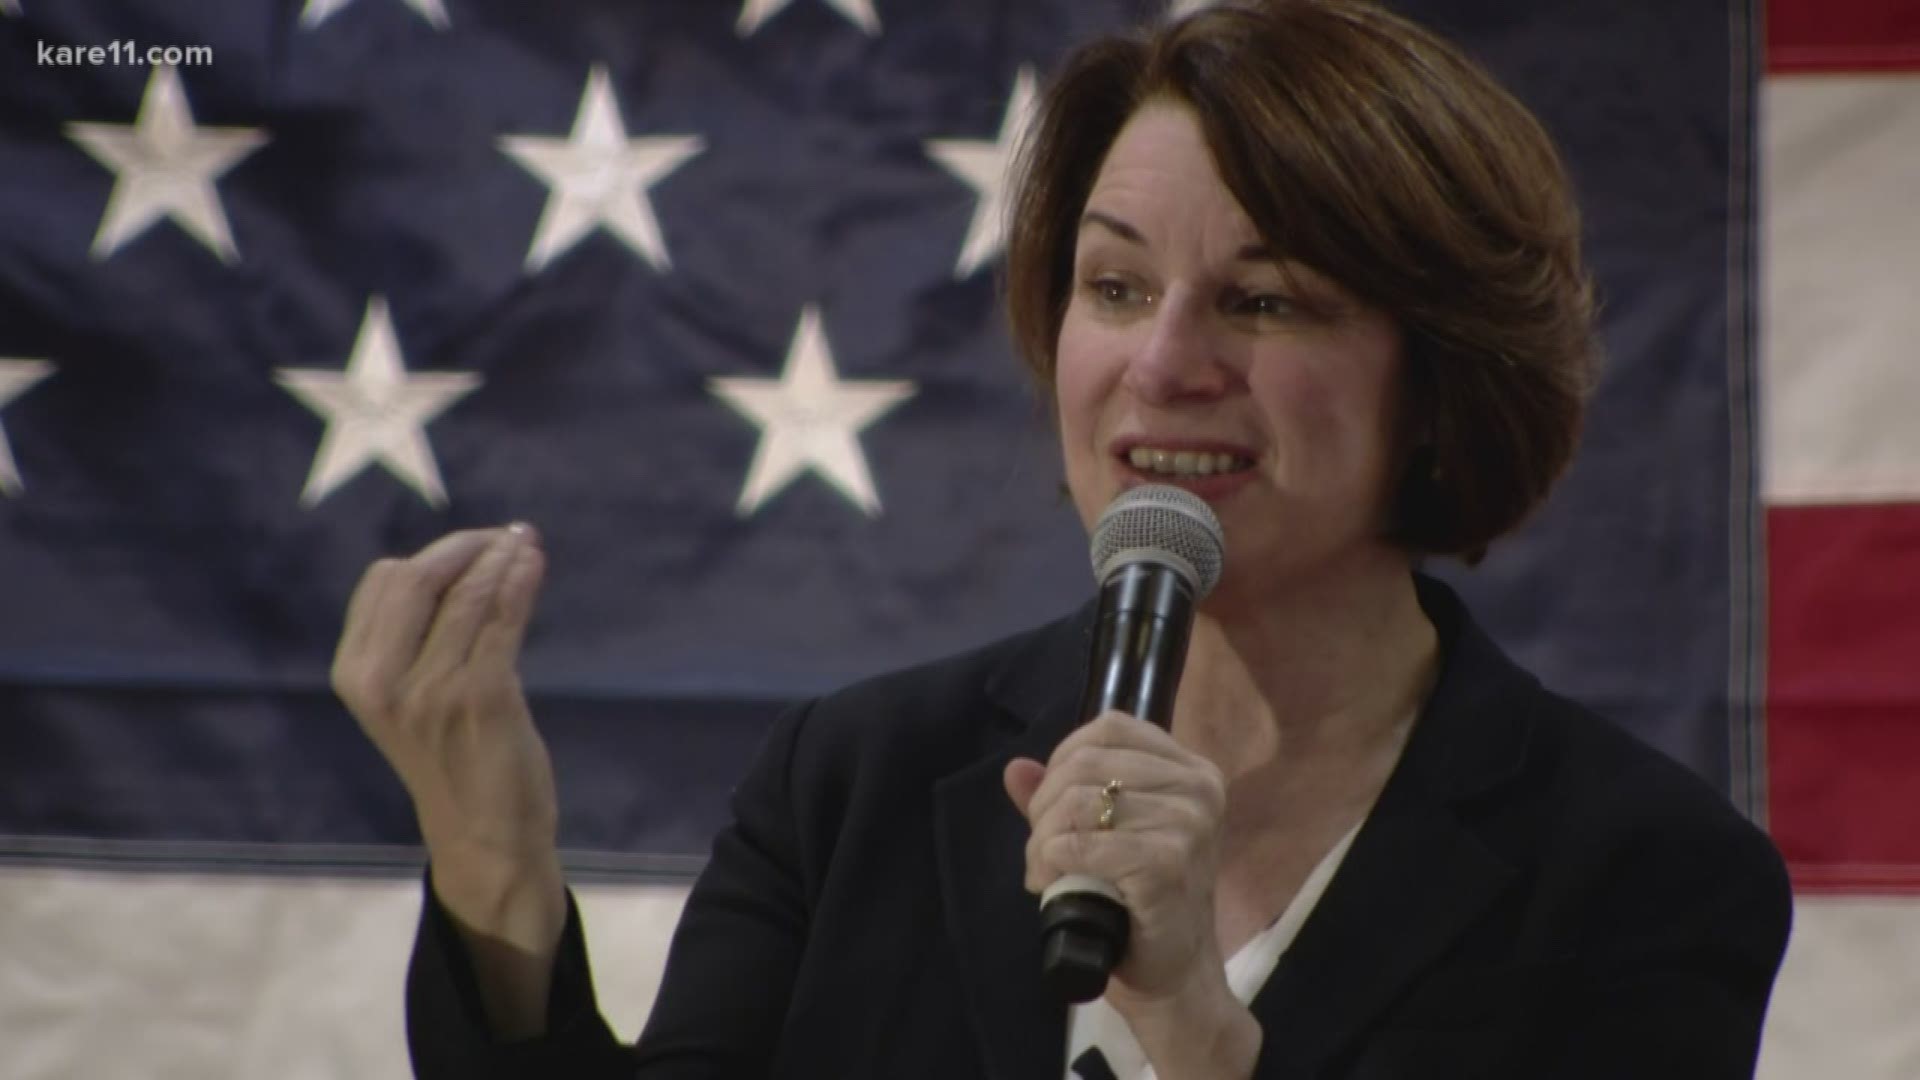 Sen. Amy Klobuchar says it's time for democrats to make their case clear.